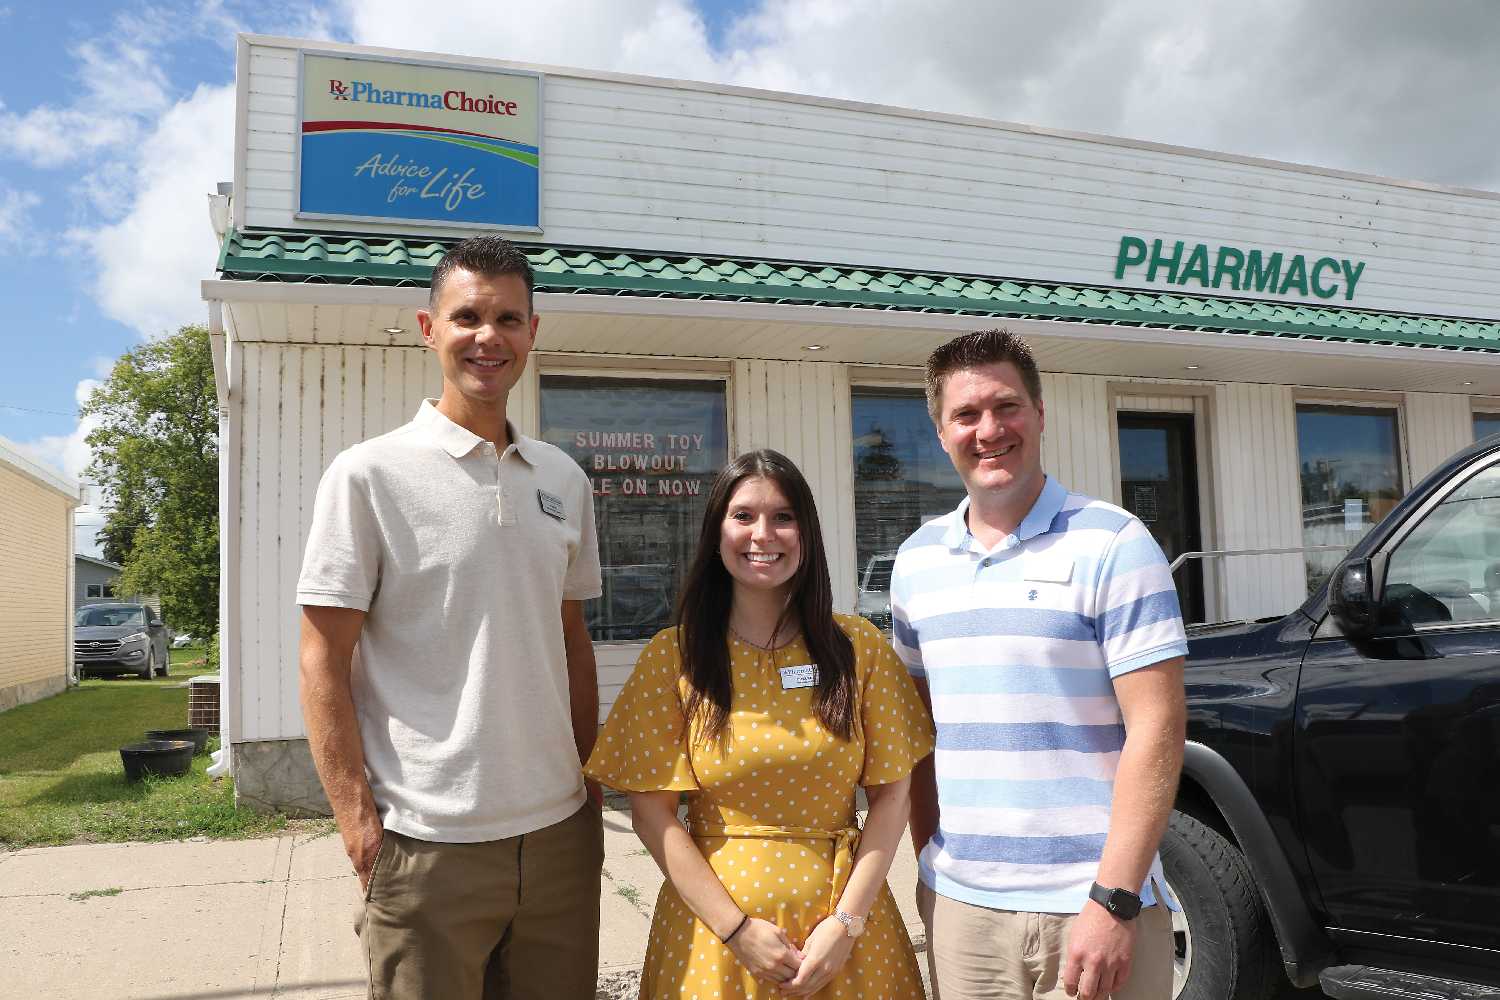 From left, Chris Fedorowich, Pharmacist Chelsea Ellison, and Warren Delmage of Legacy Pharmacies. The company is the new owner of Rocanville Pharmacy, formerly a Super Thrifty location.